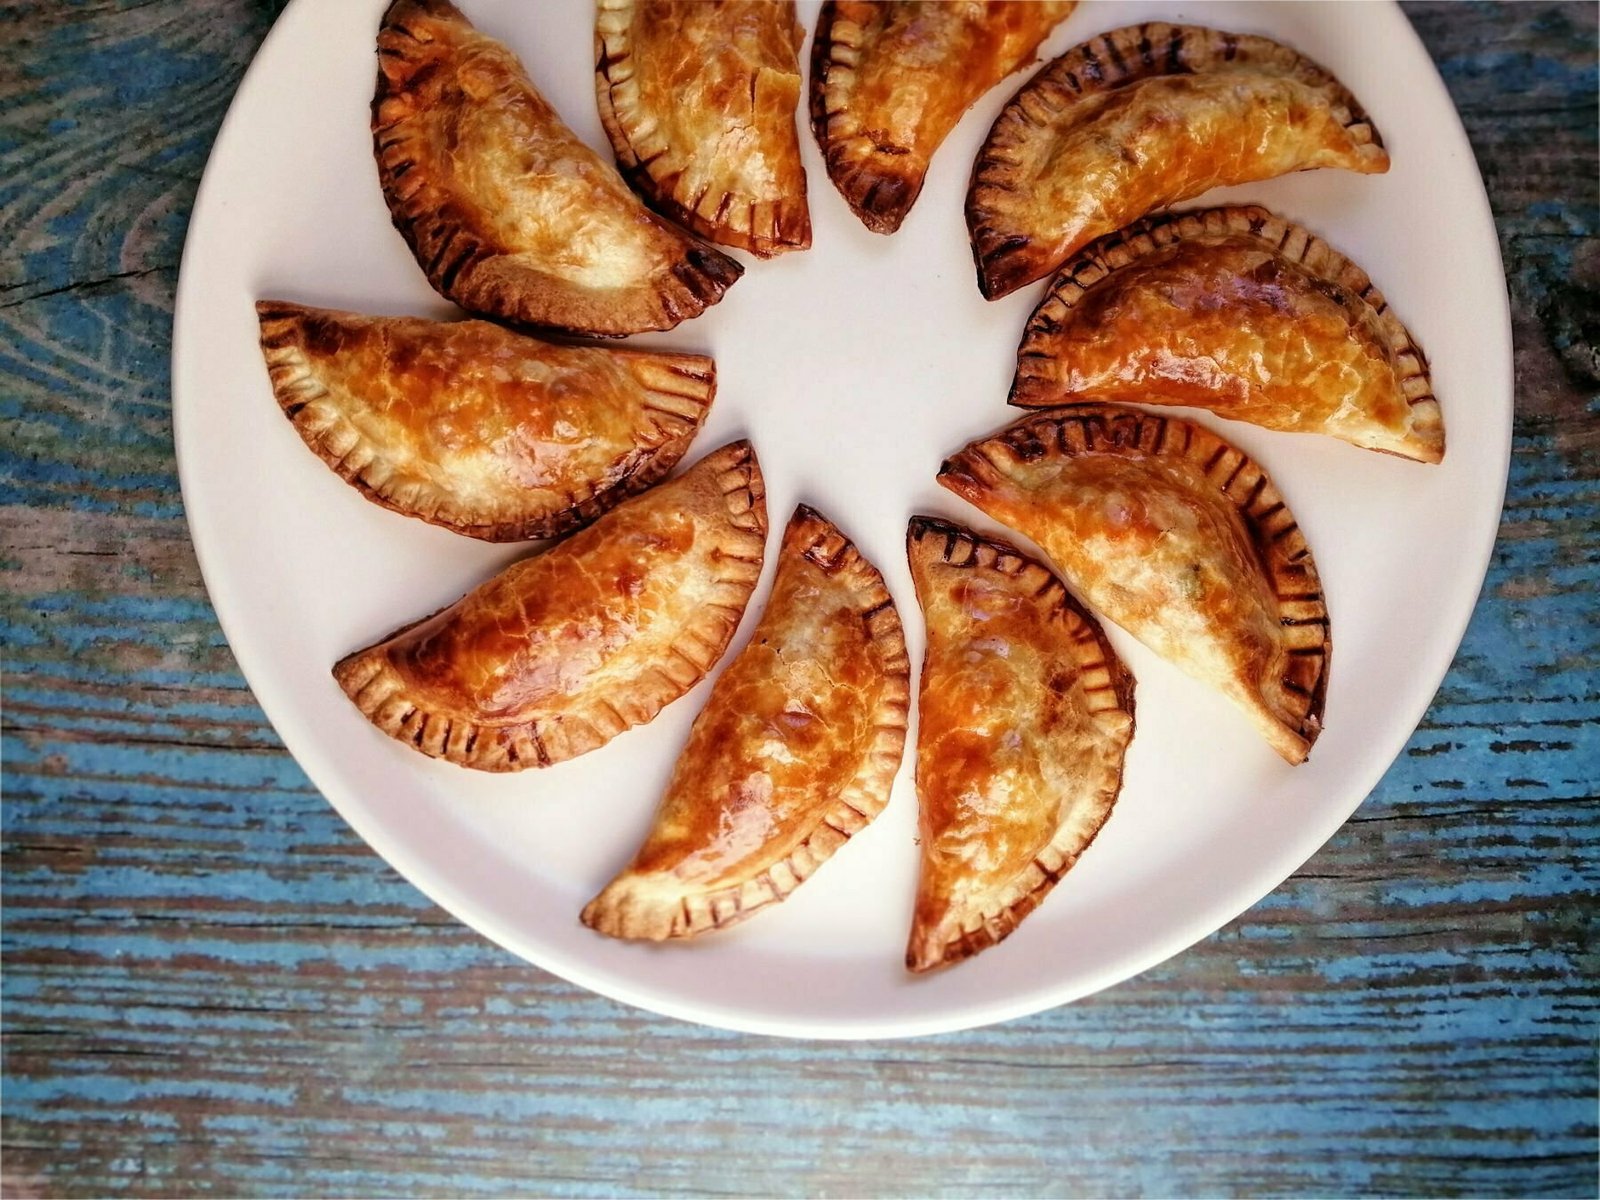 chicken with cider infused chorizo empanadas sits on a white plate on top of a blue wooden benchtop